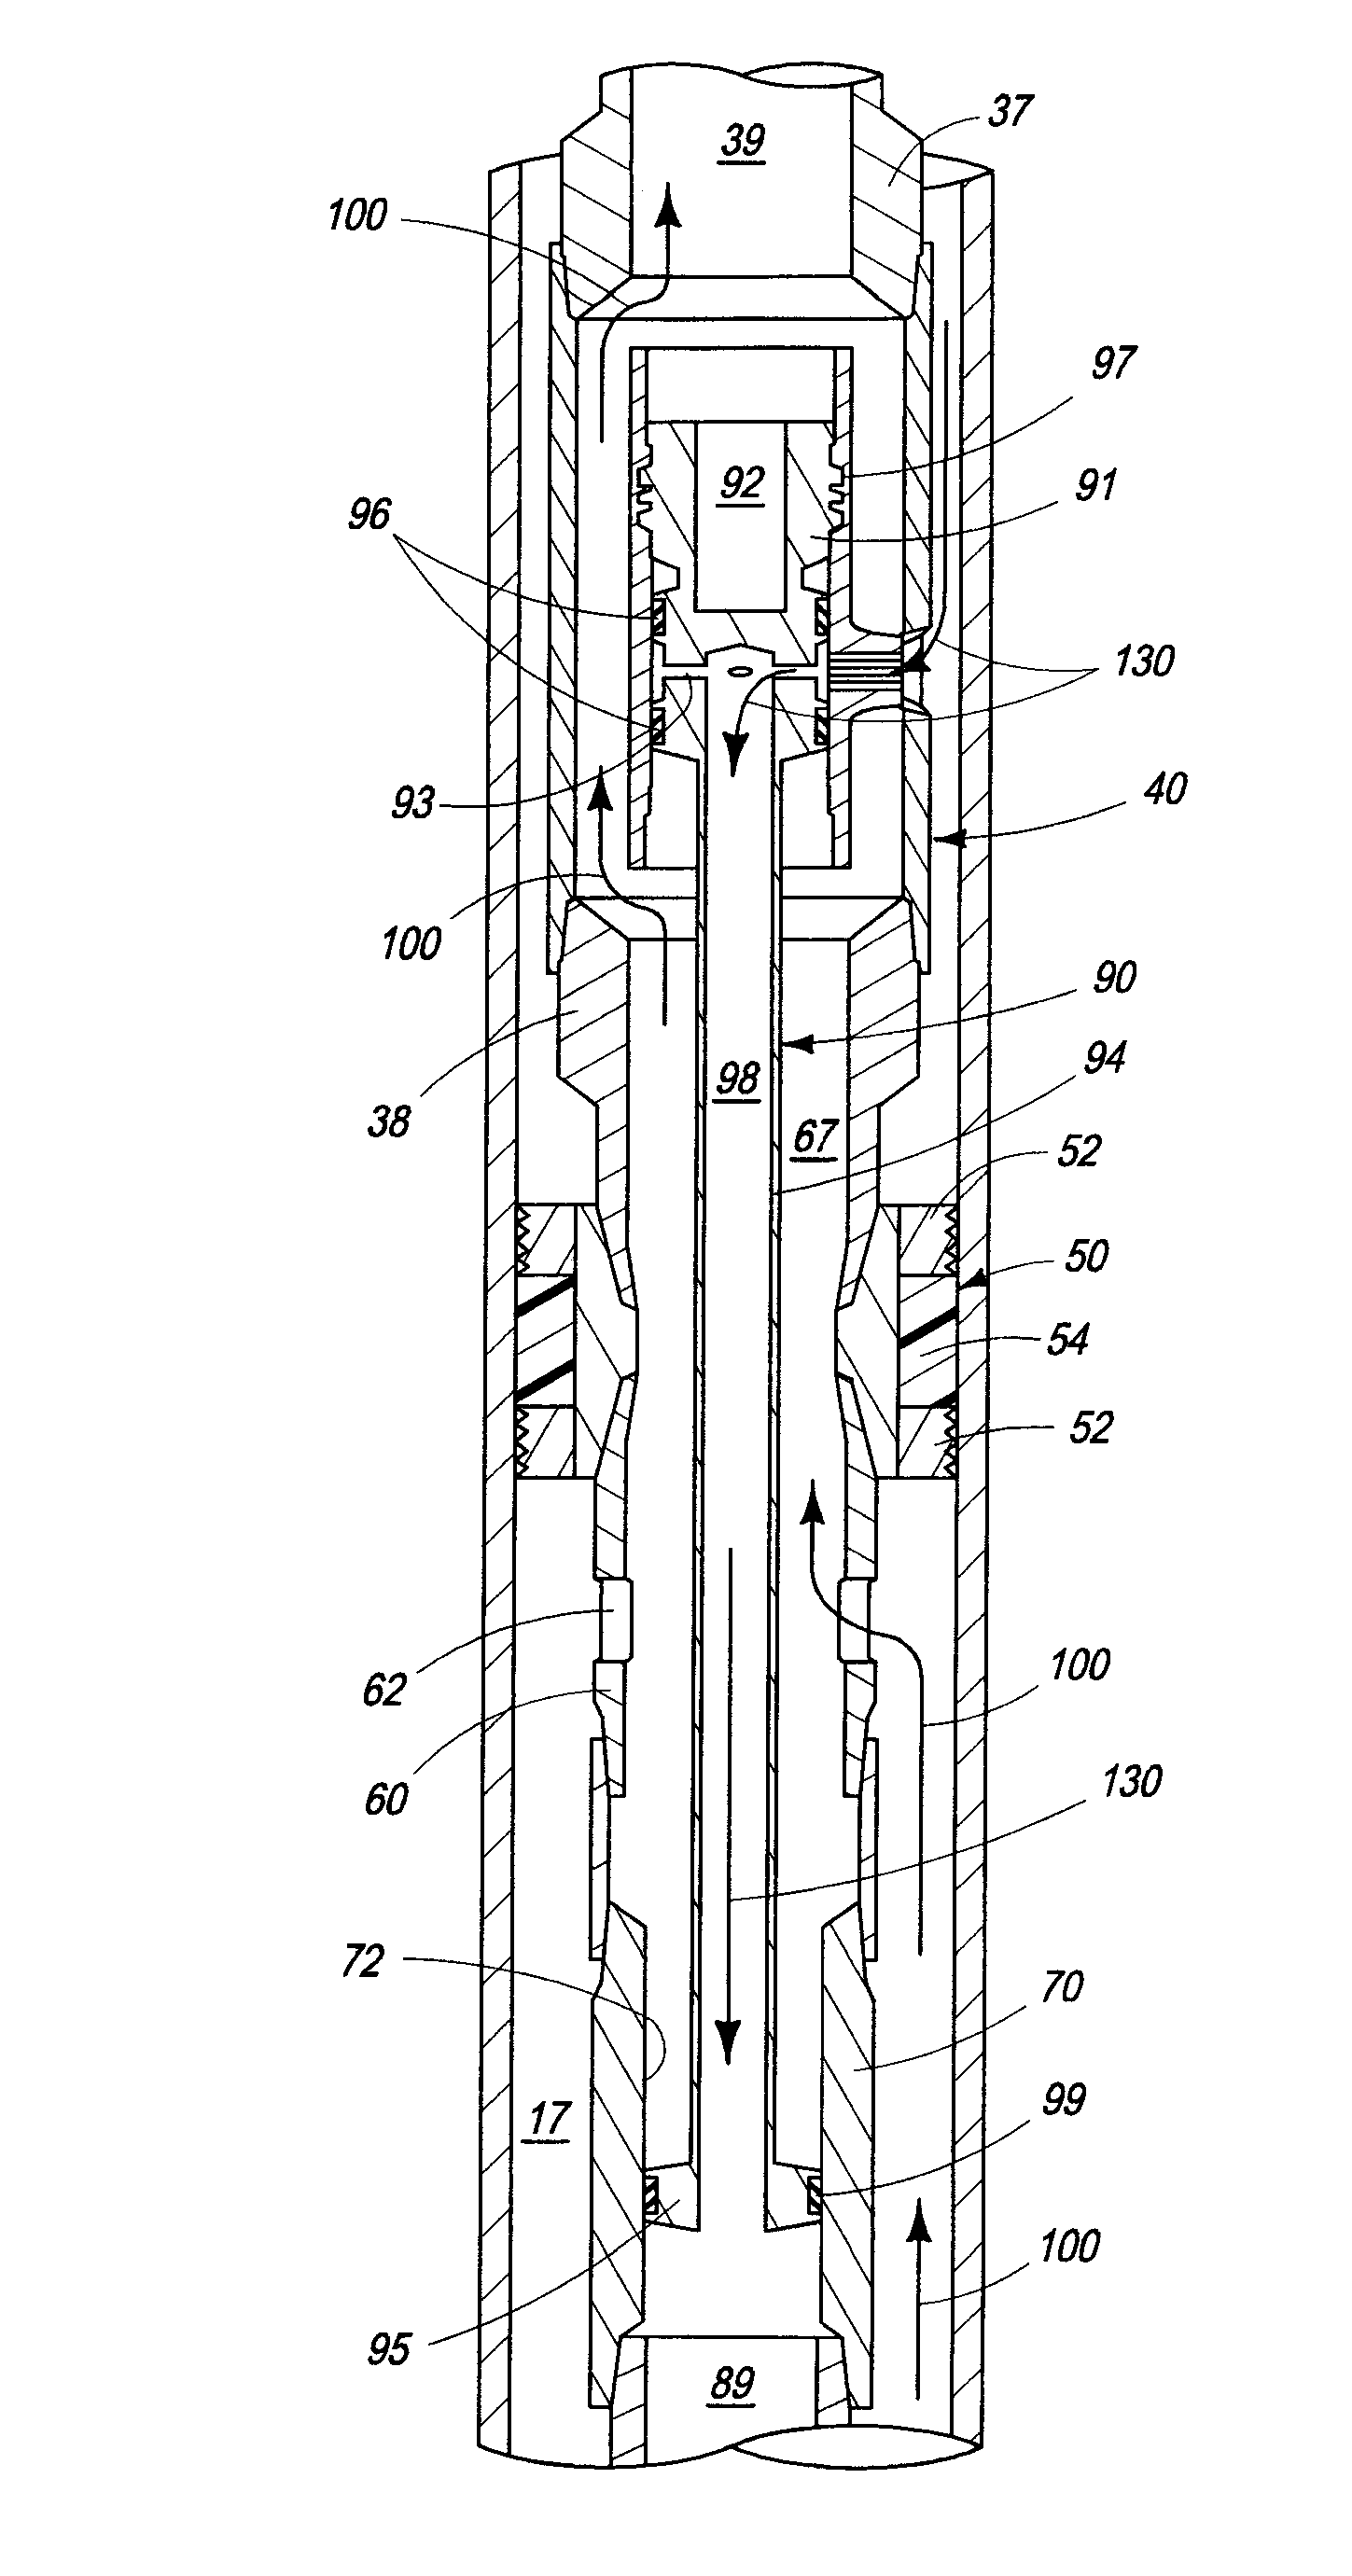 Apparatus, assembly and process for injecting fluid into a subterranean well